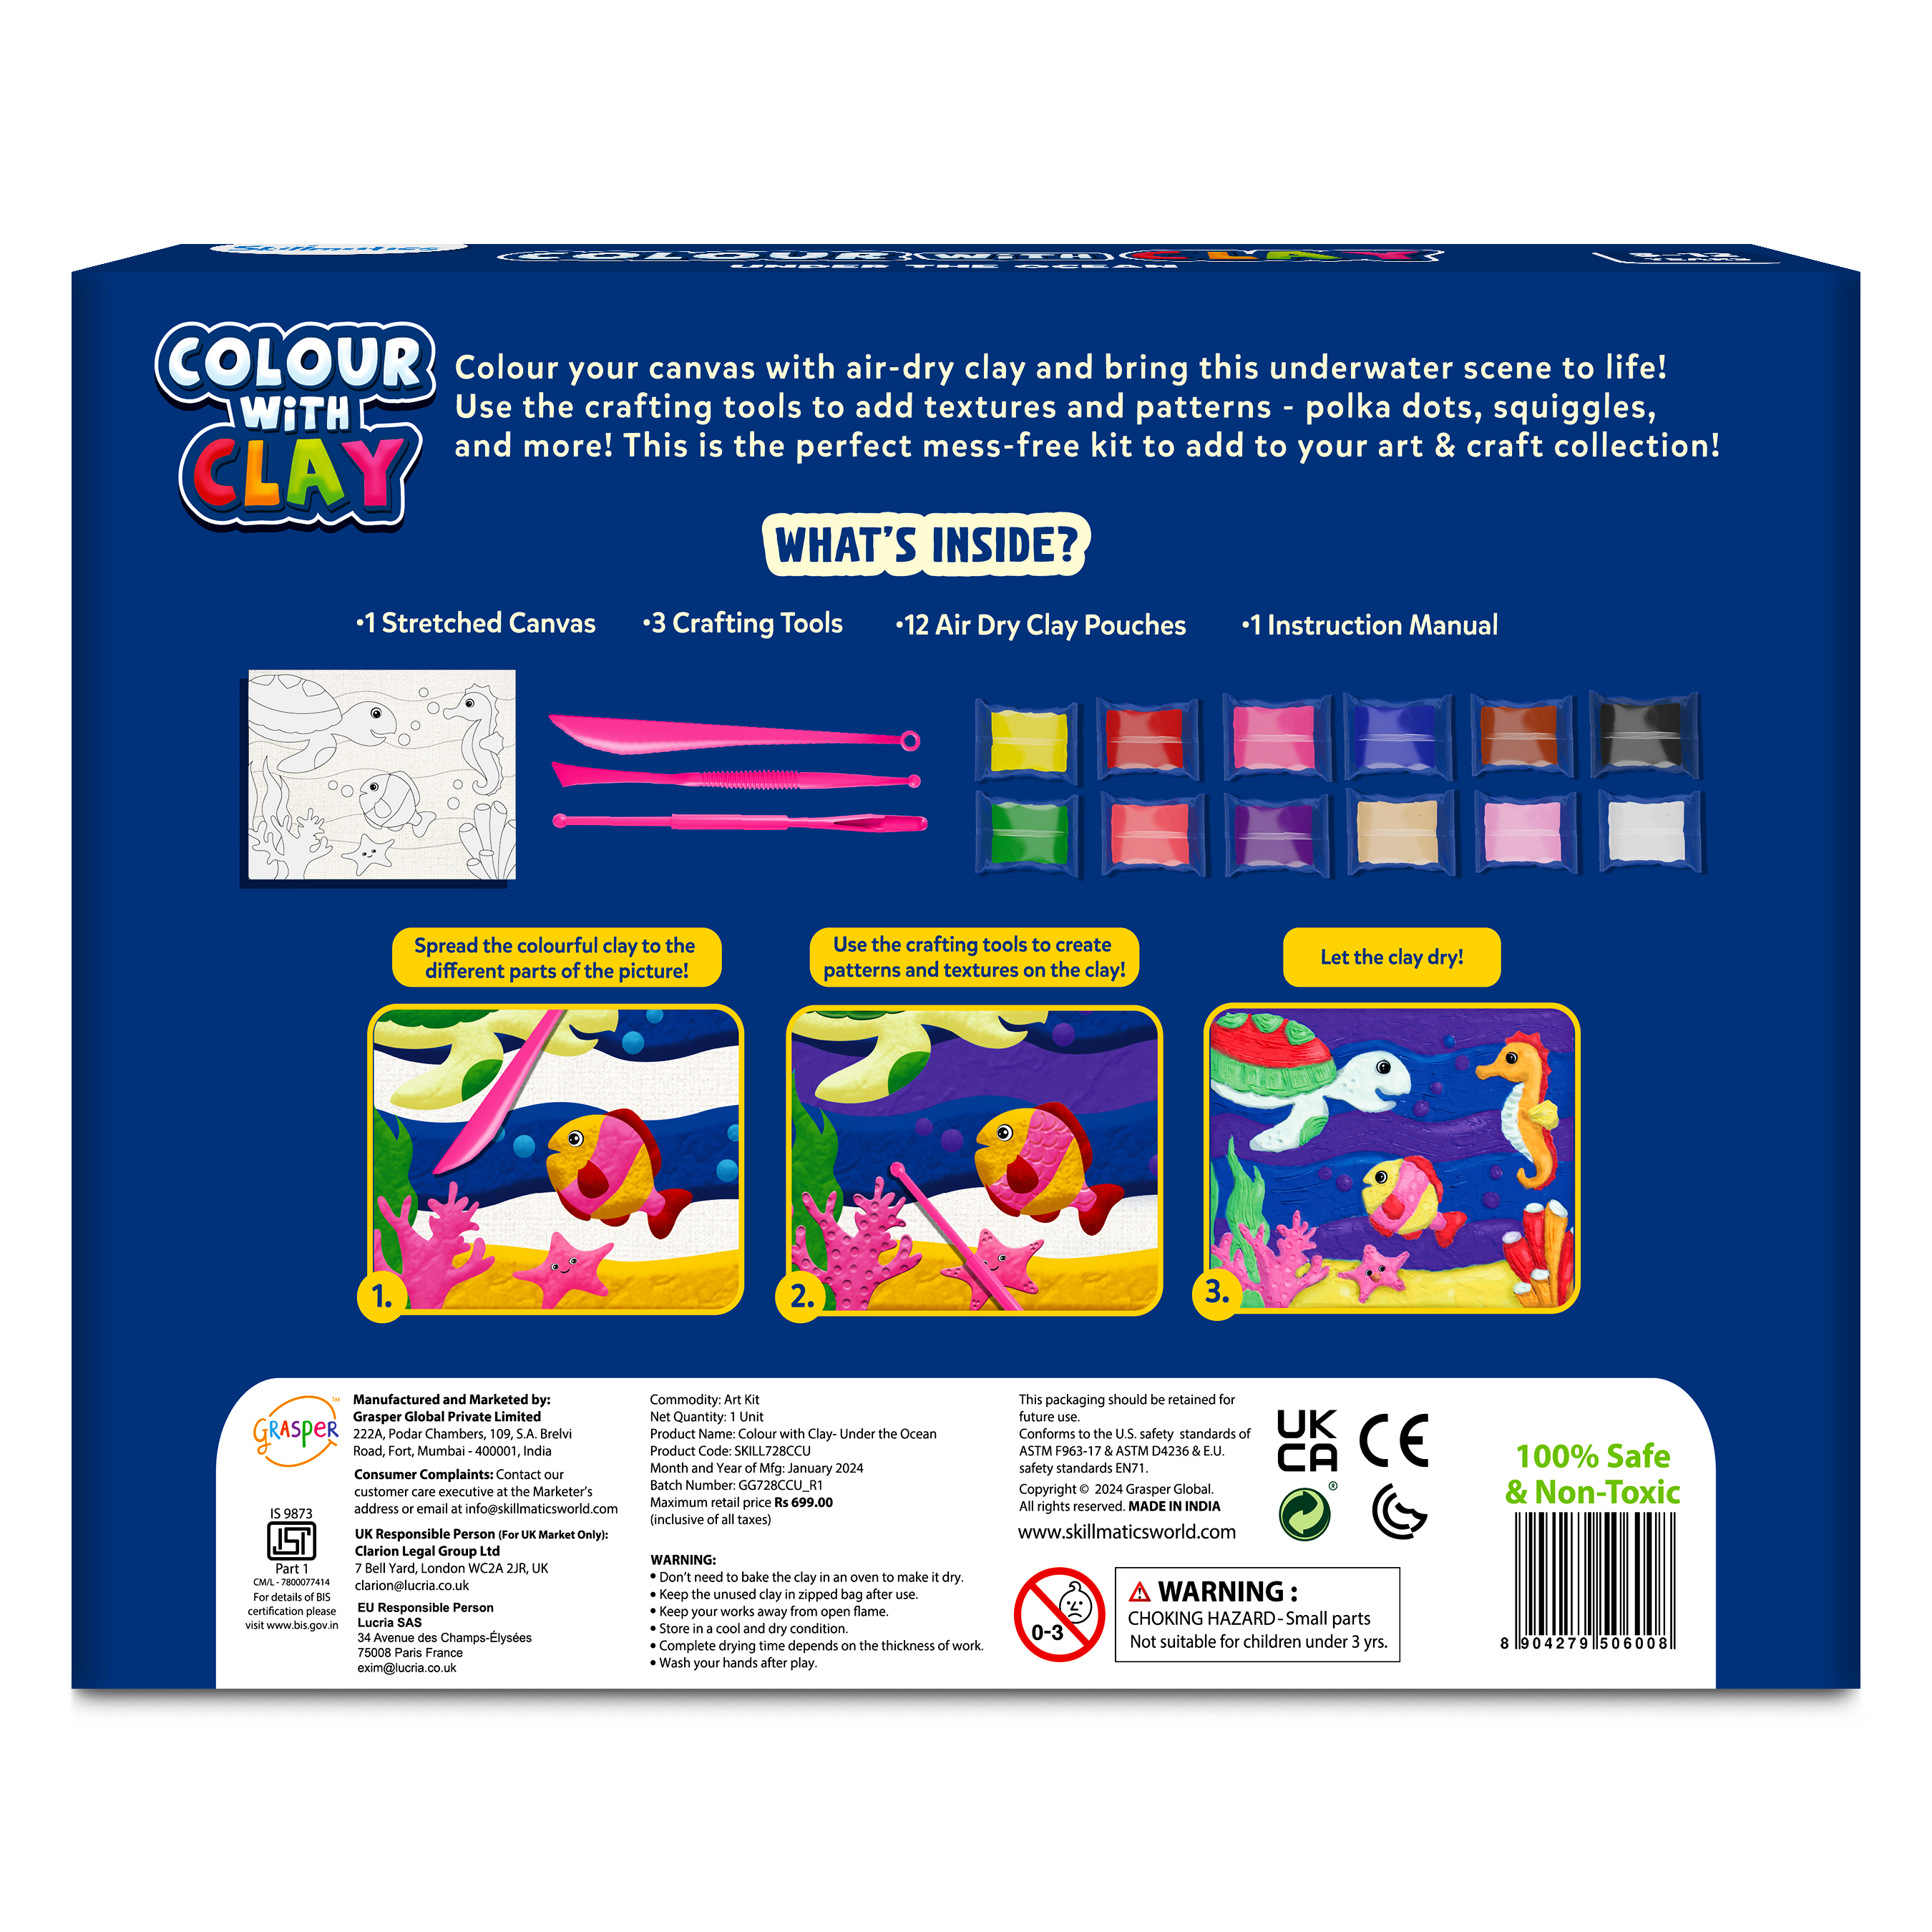 Skillmatics Art & Craft Kit - Colour with Clay, No Mess Art, Create a Clay Canvas of Under The Ocean, Gifts for Ages 5 to 12